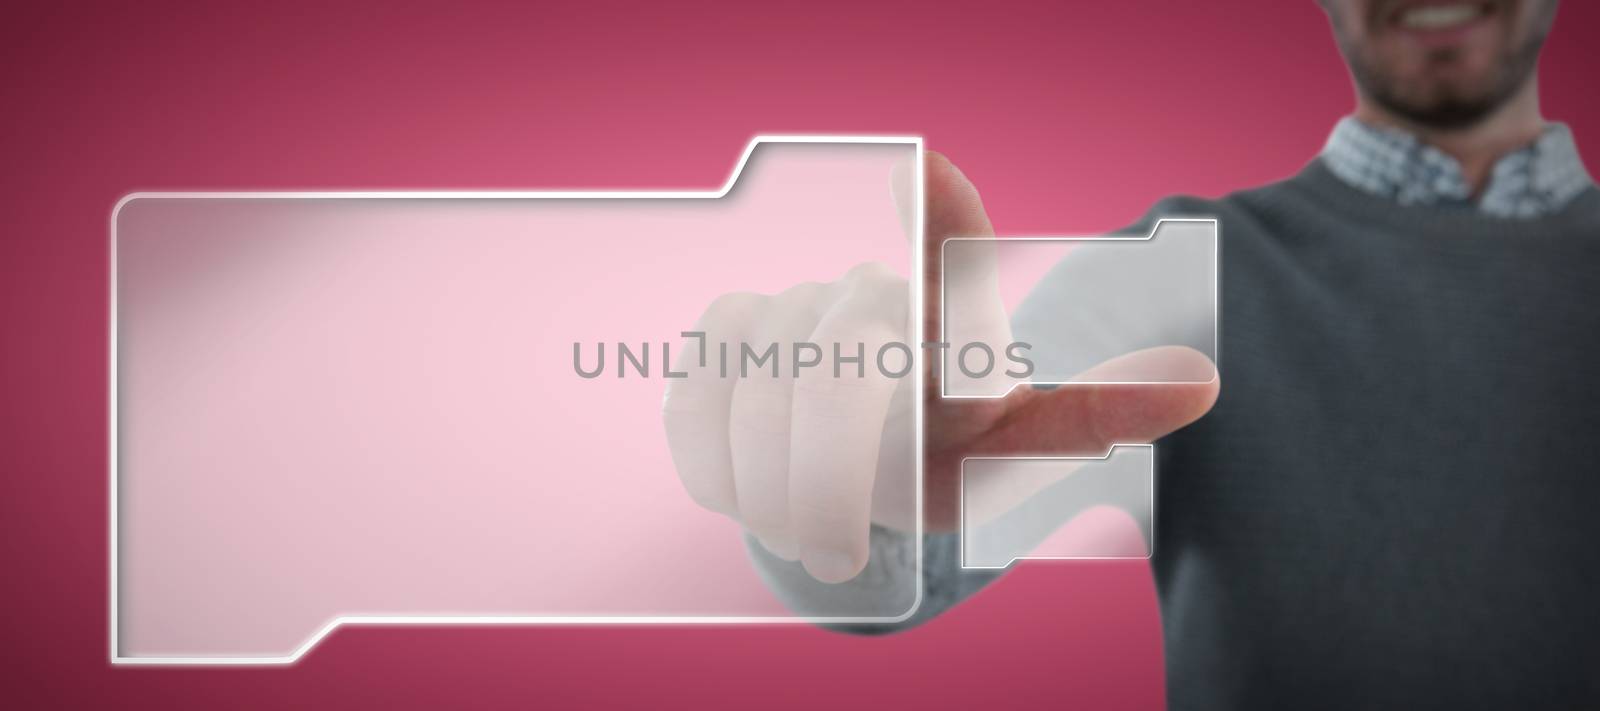 Composite image of hand gesture against white background by Wavebreakmedia